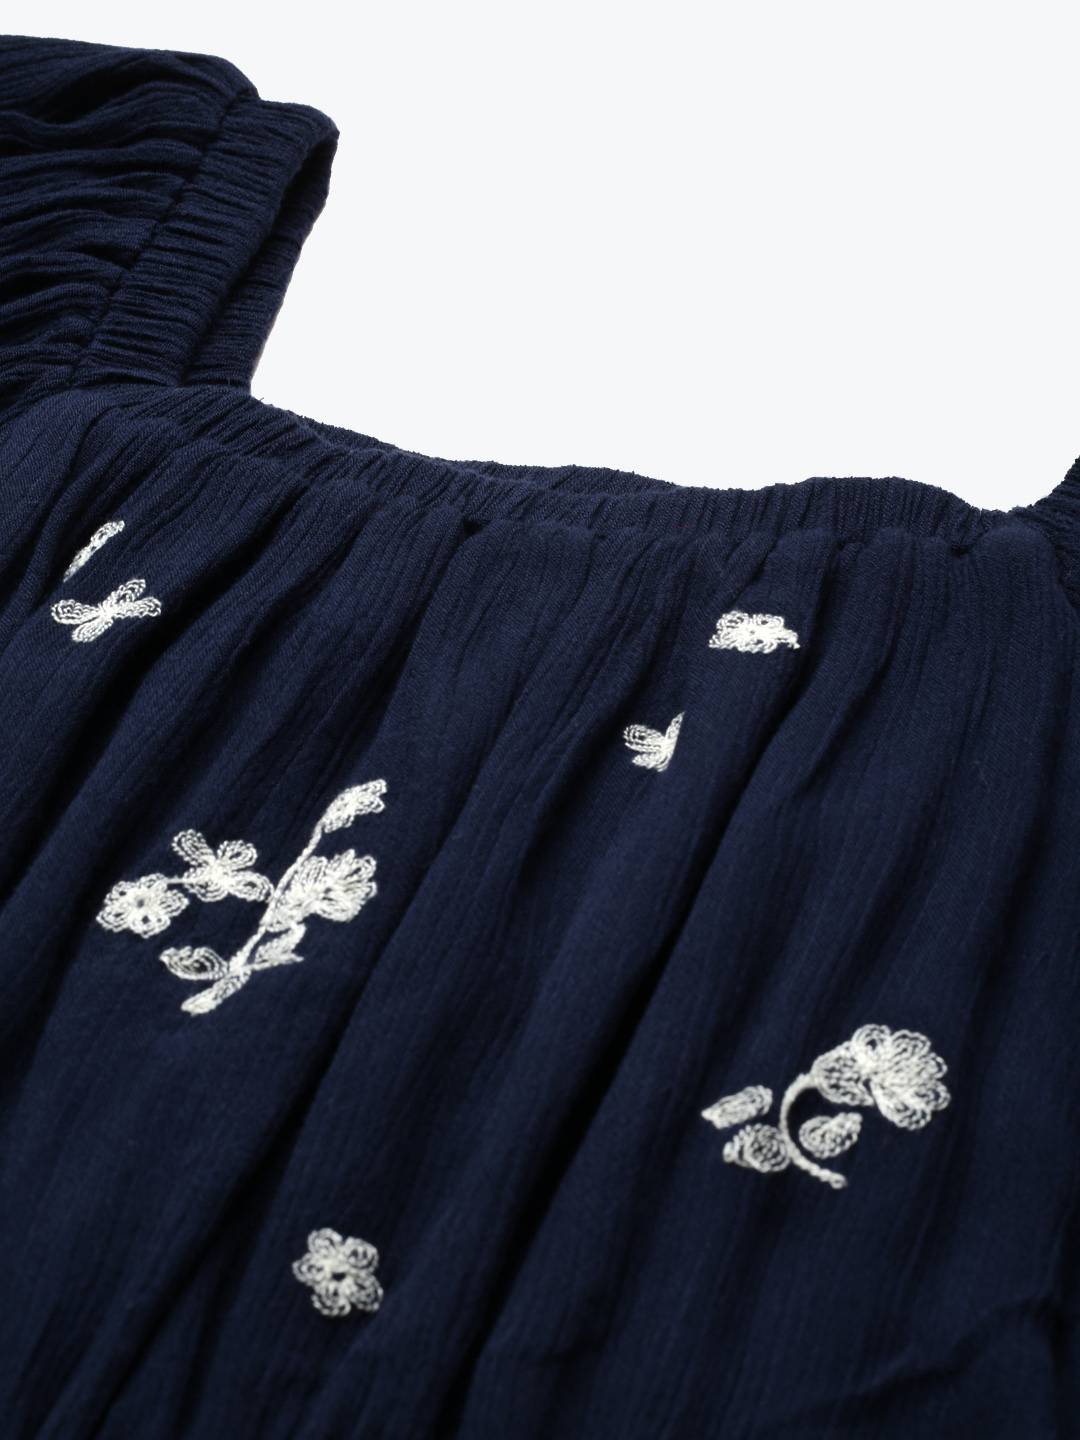 Navy Blue Embroidered A-Line  Dress